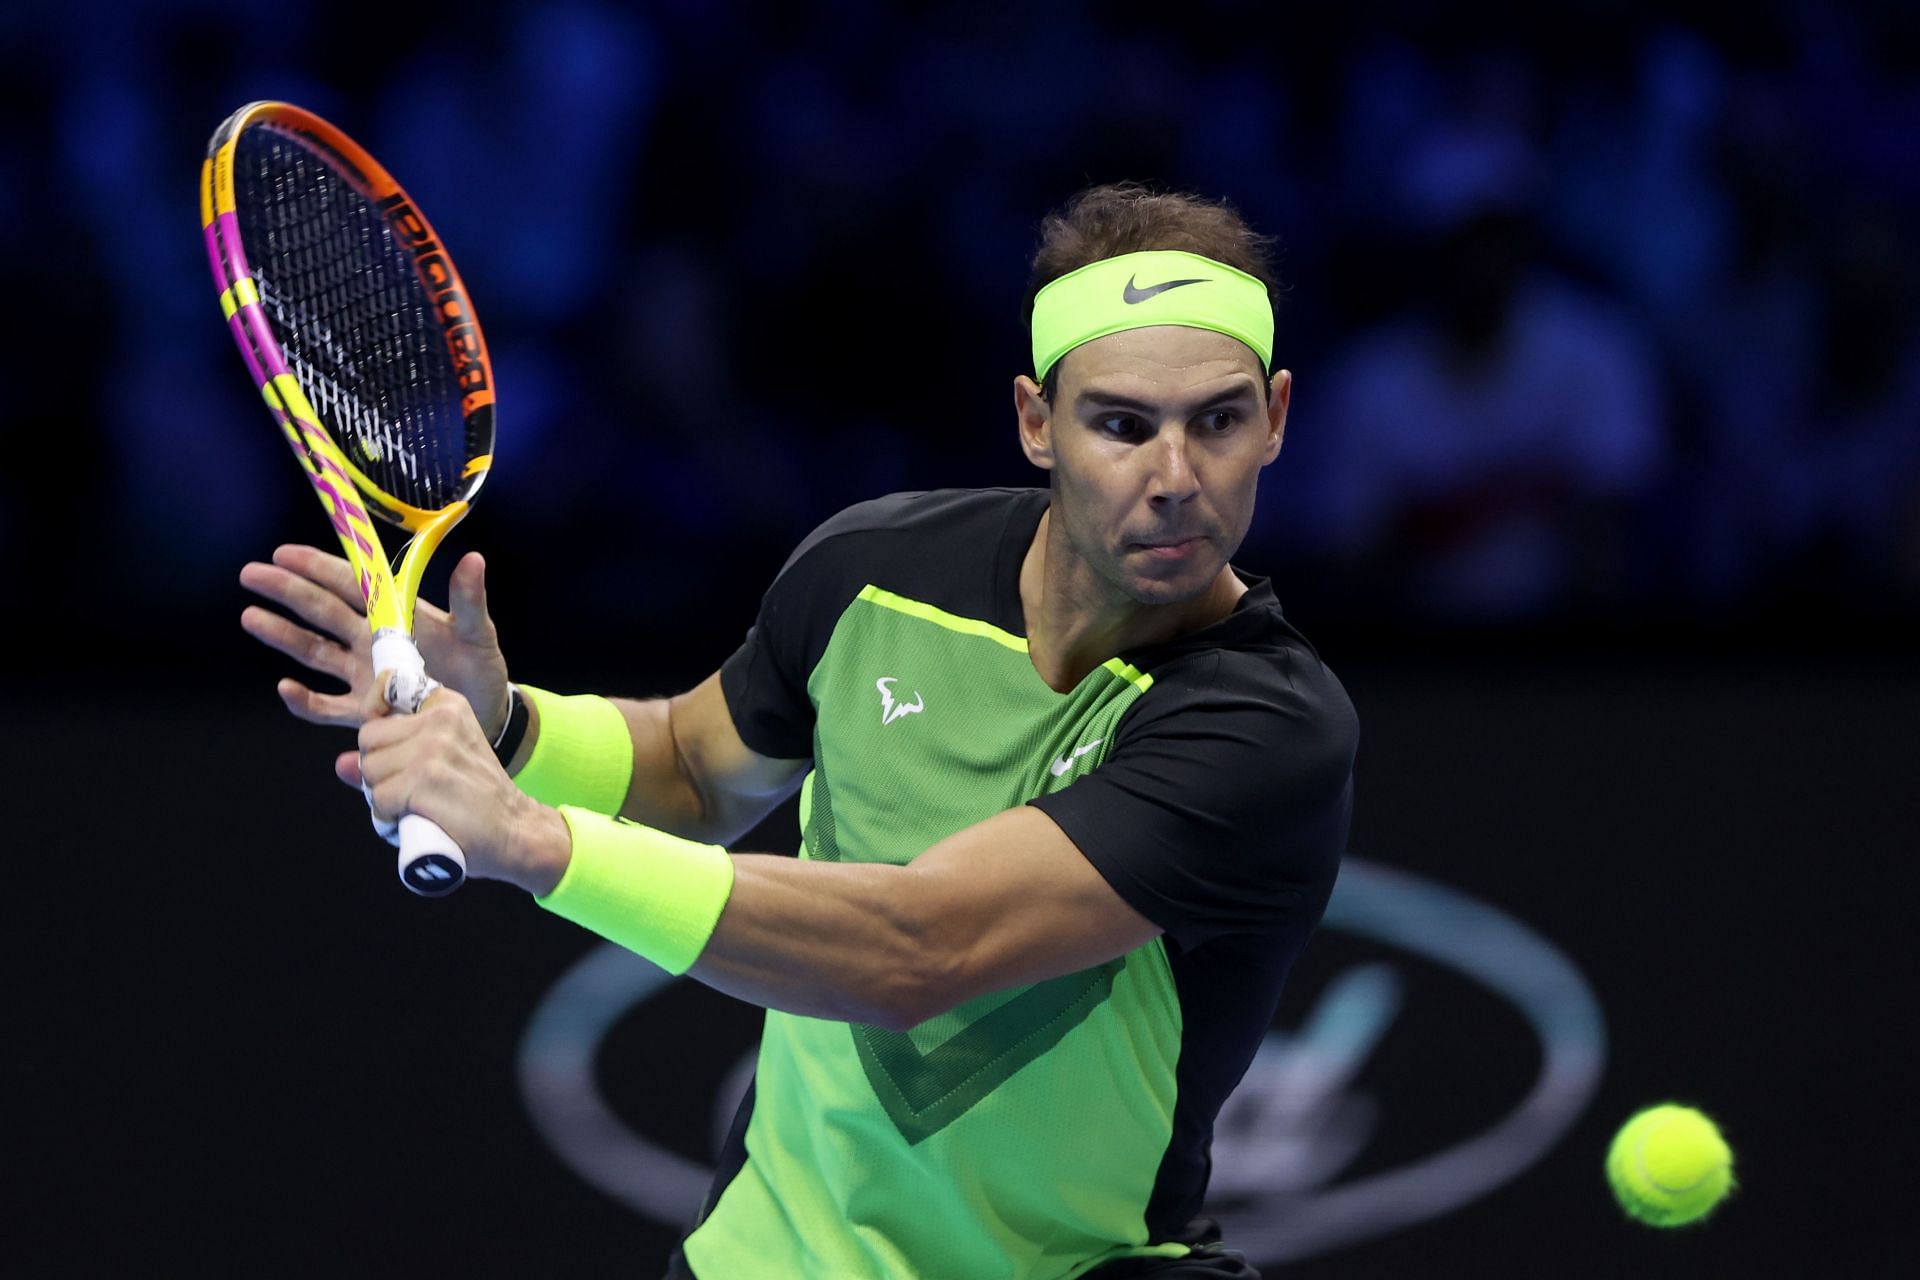 Rafael Nadal was recently eliminated from the ATP Finals